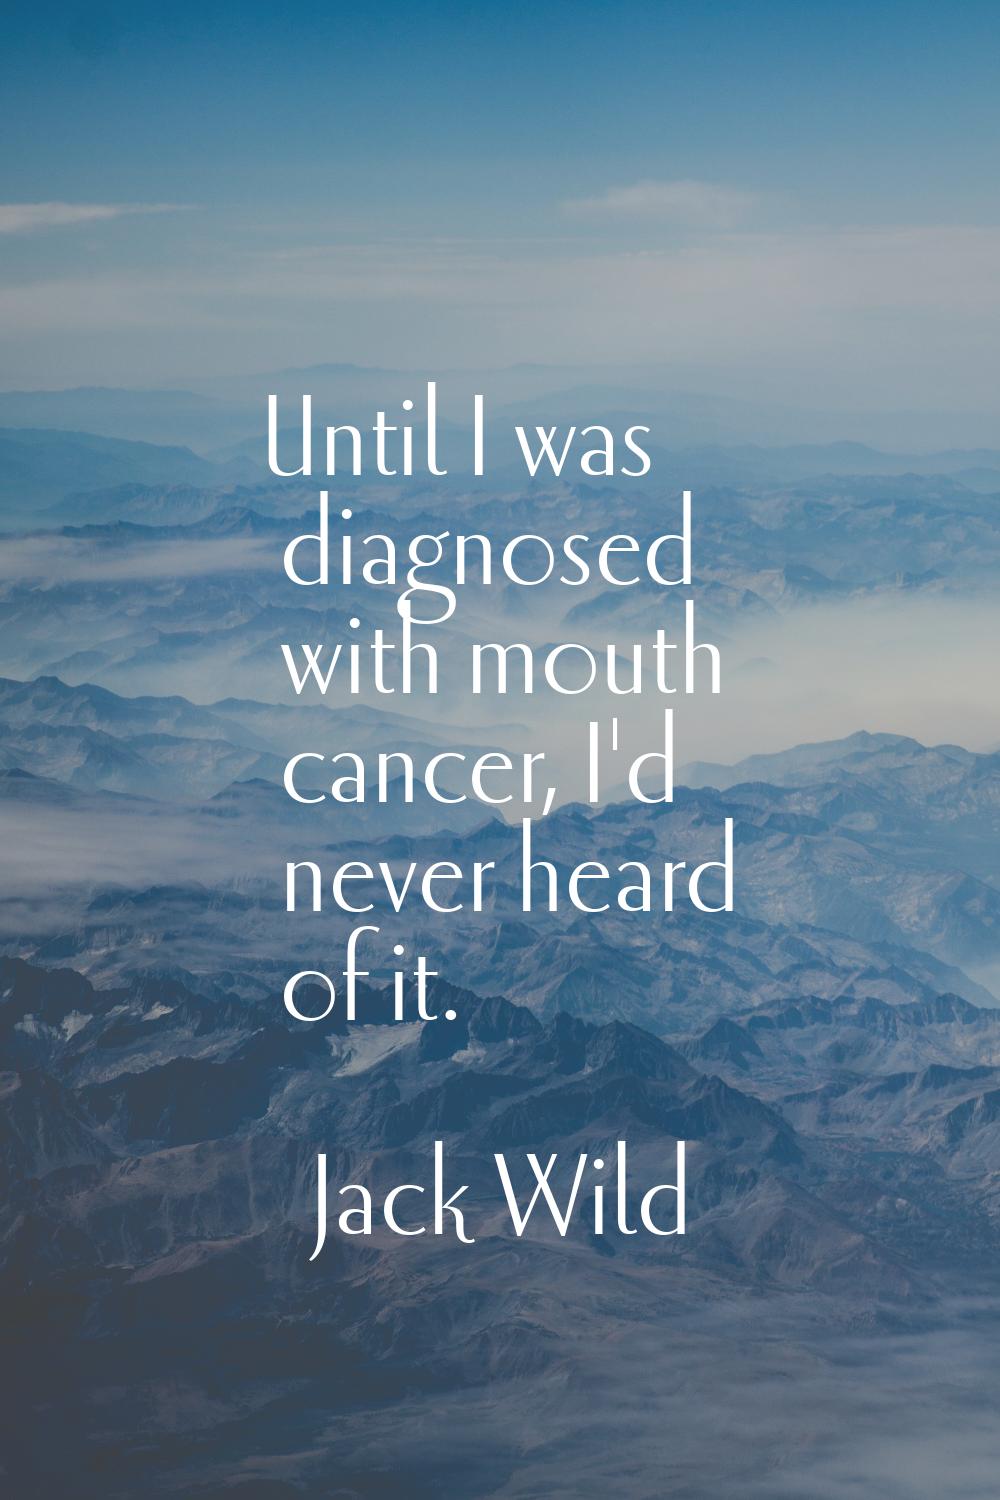 Until I was diagnosed with mouth cancer, I'd never heard of it.